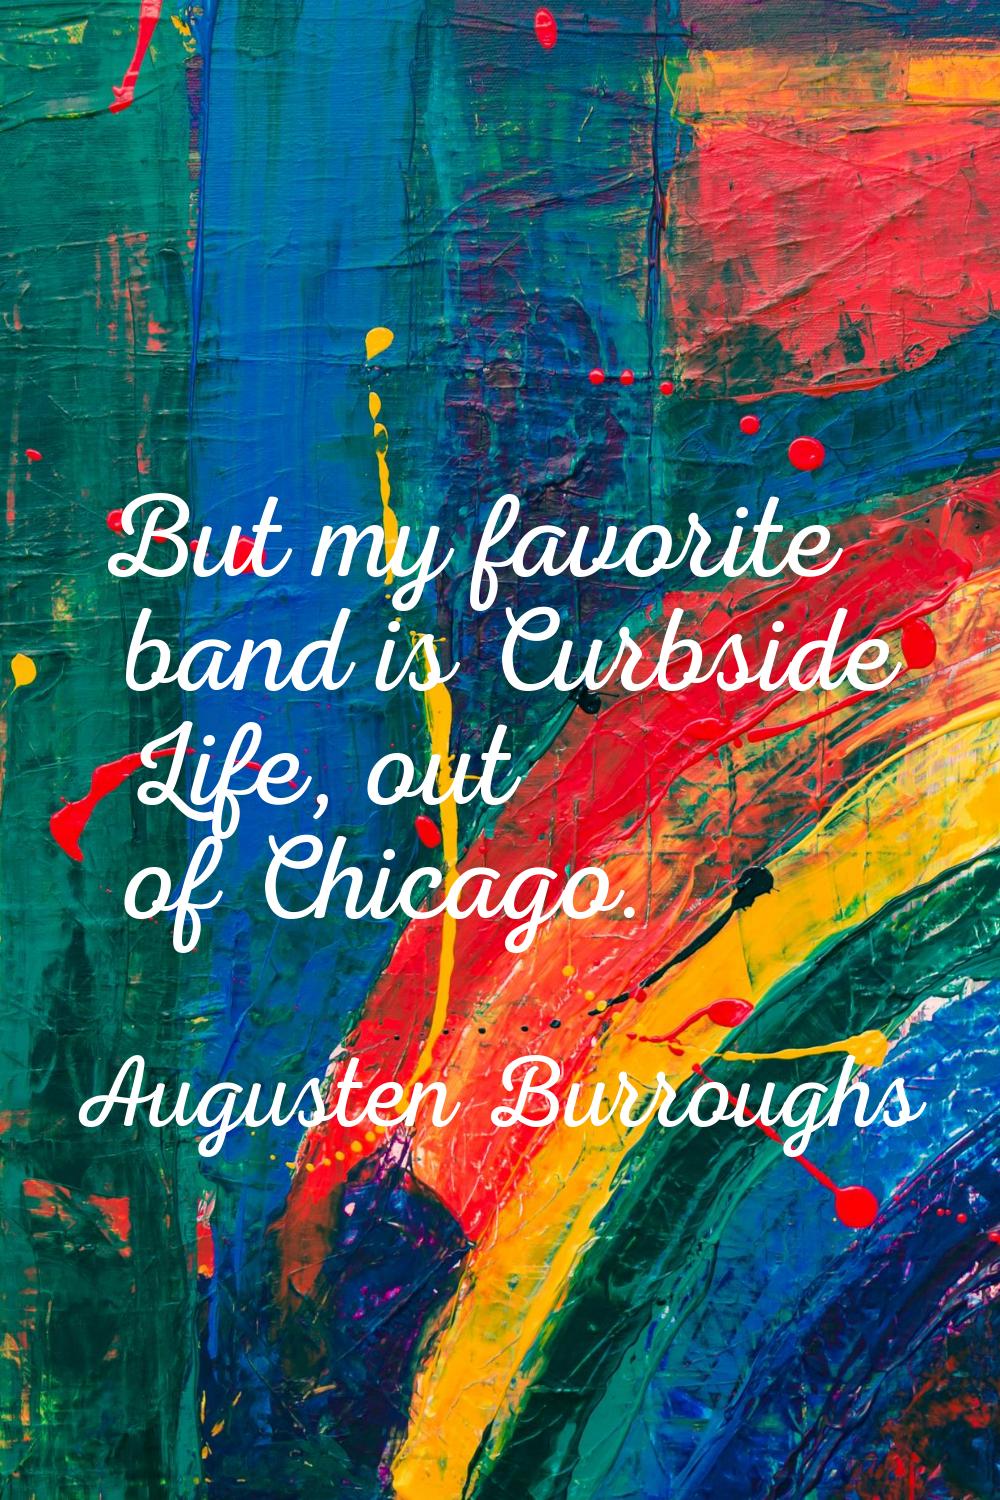 But my favorite band is Curbside Life, out of Chicago.